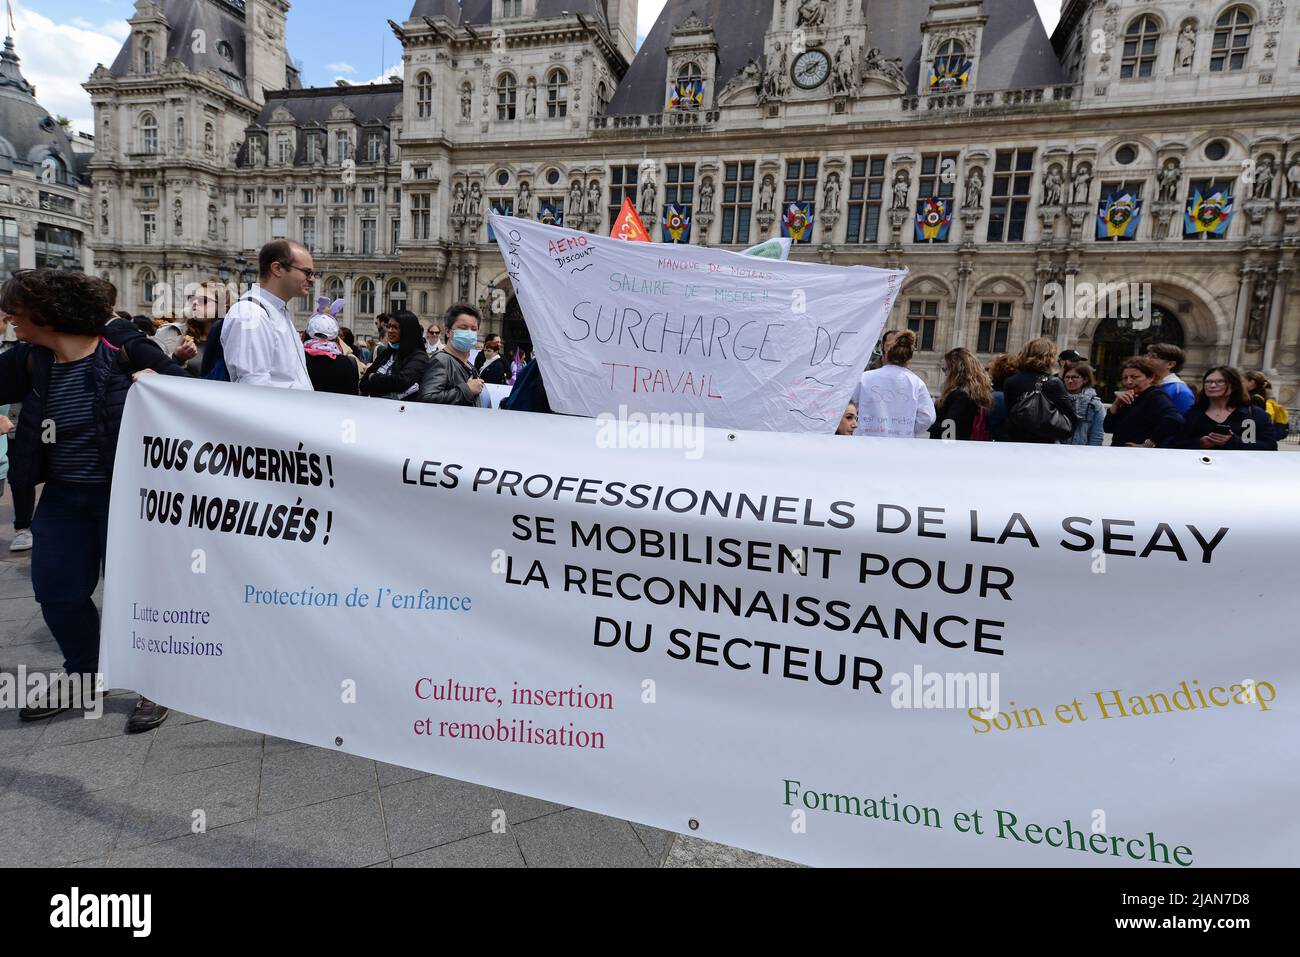 Medical and social workers were on strike and demonstrating in the streets of Paris for pay rises, better working conditions and recruitment Stock Photo